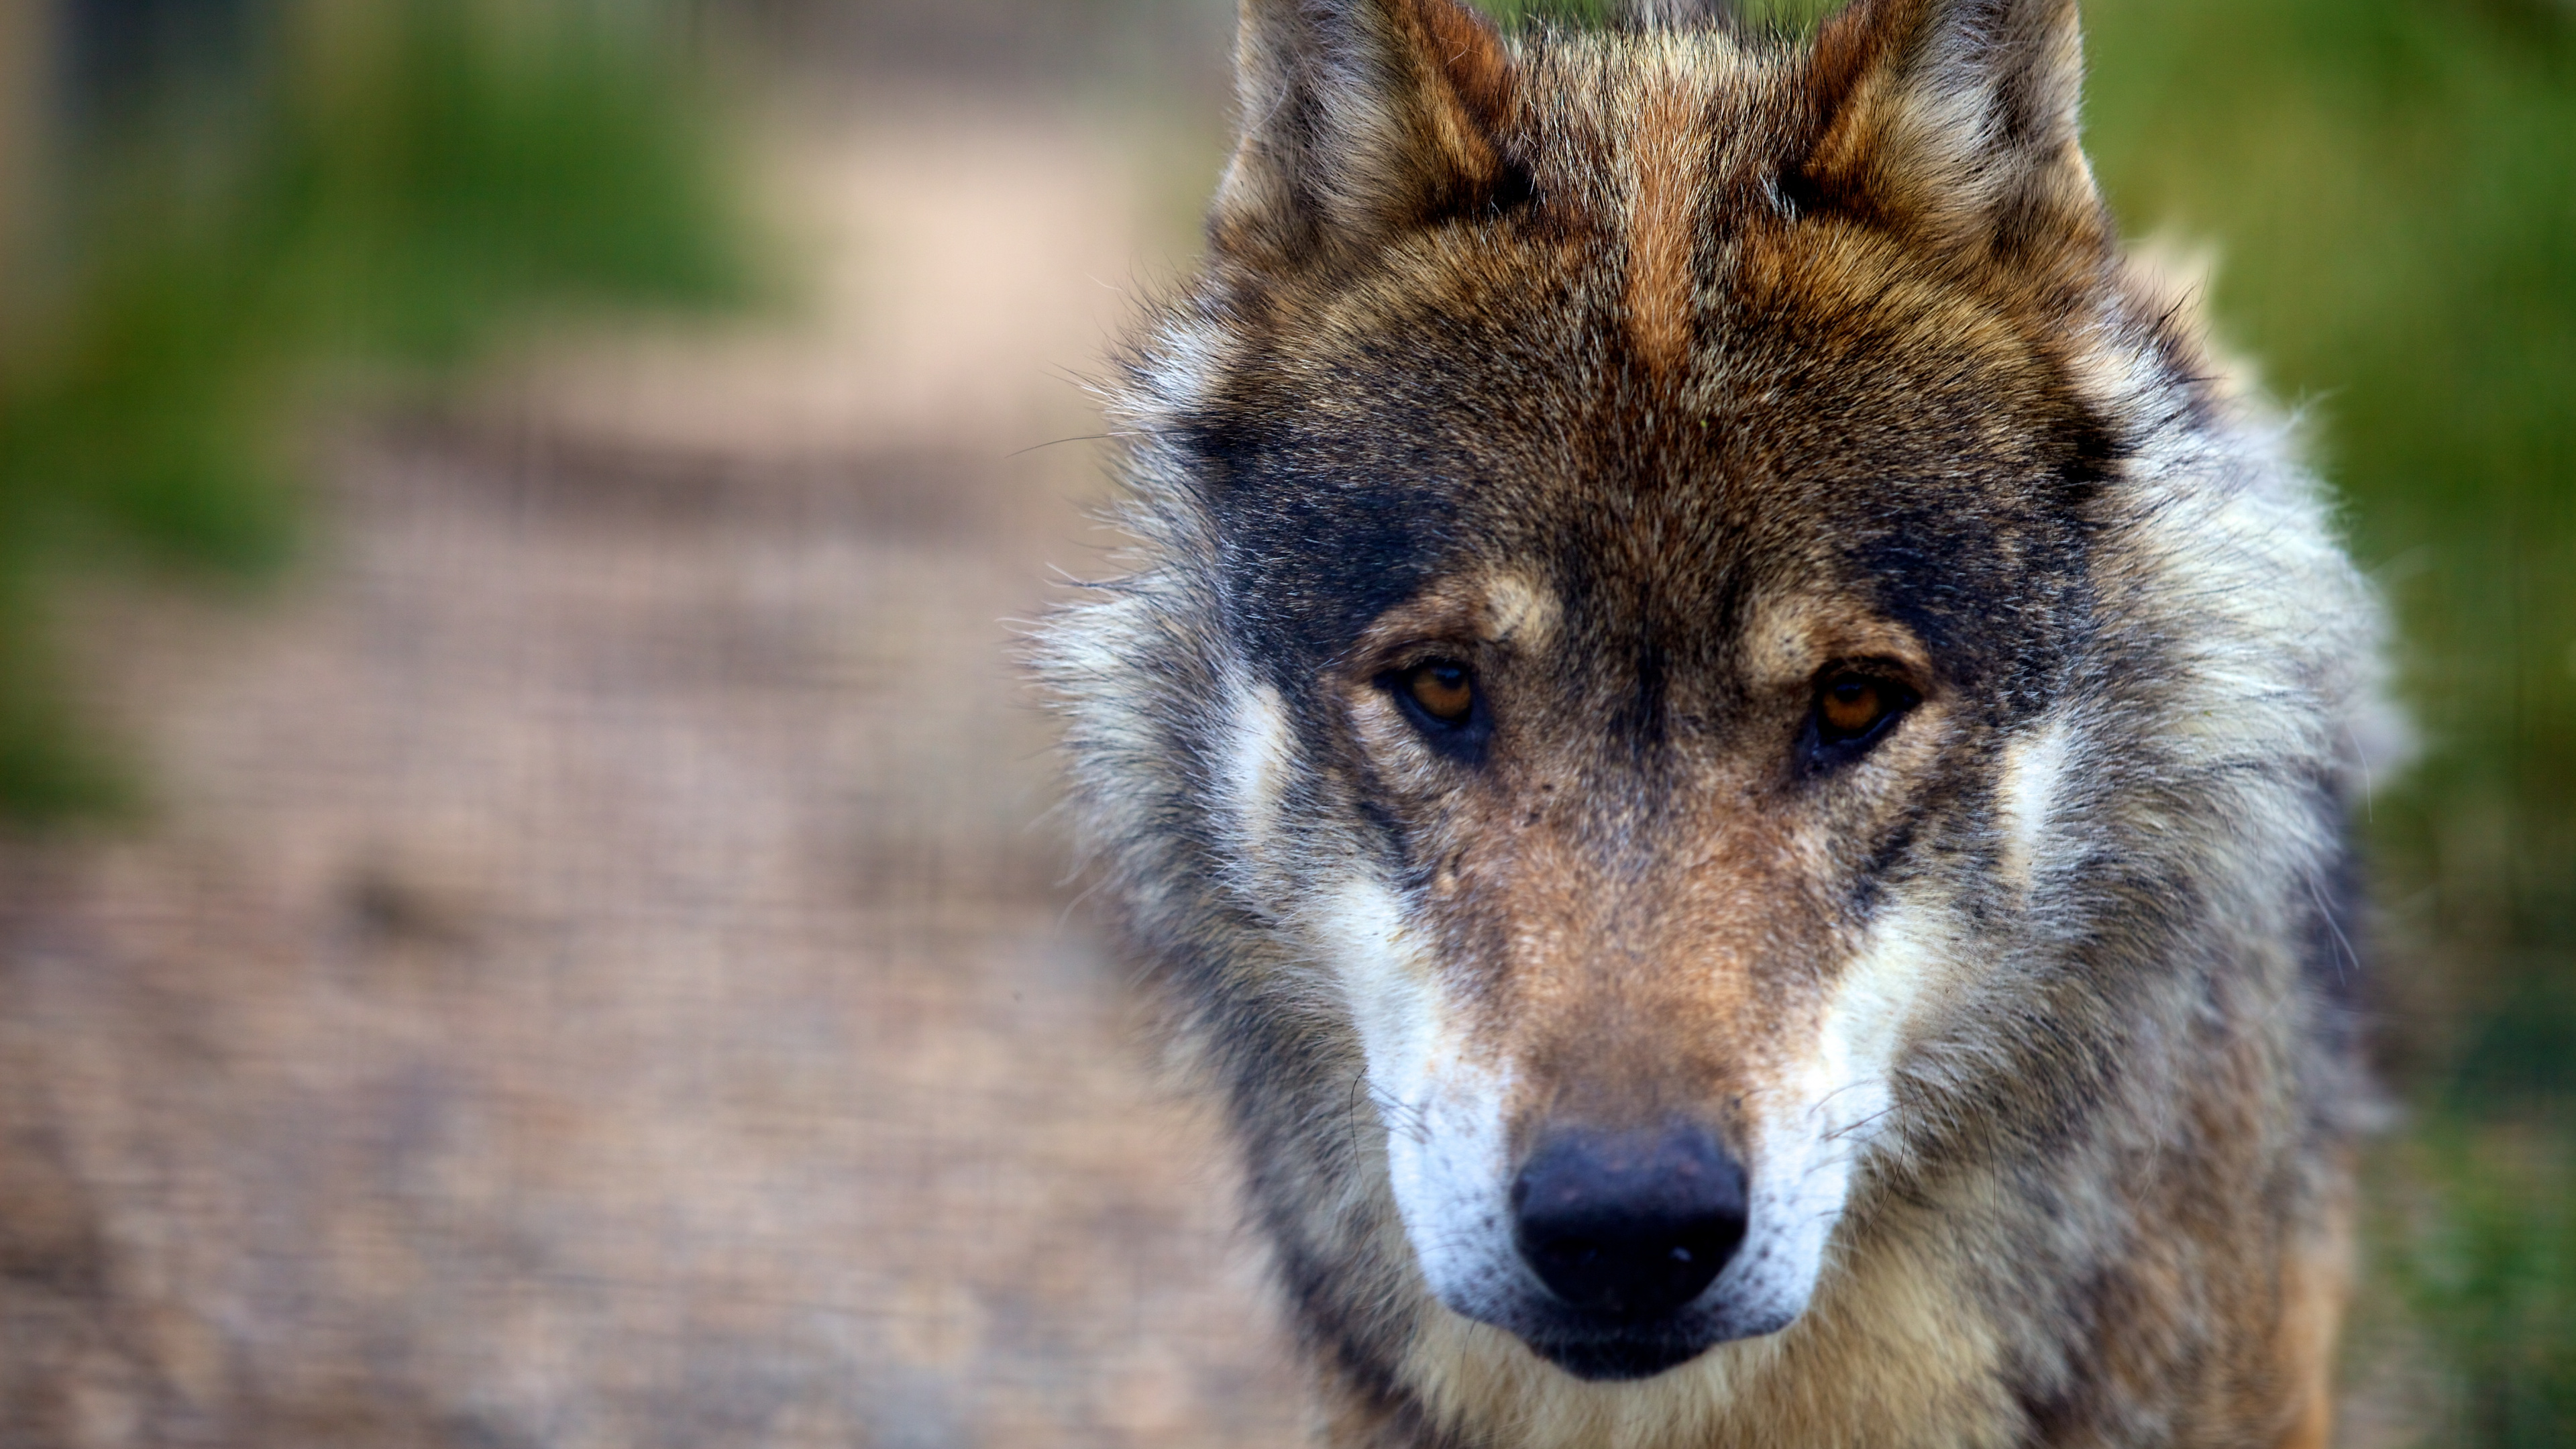 Brown and Black Wolf in Close up Photography. Wallpaper in 3840x2160 Resolution